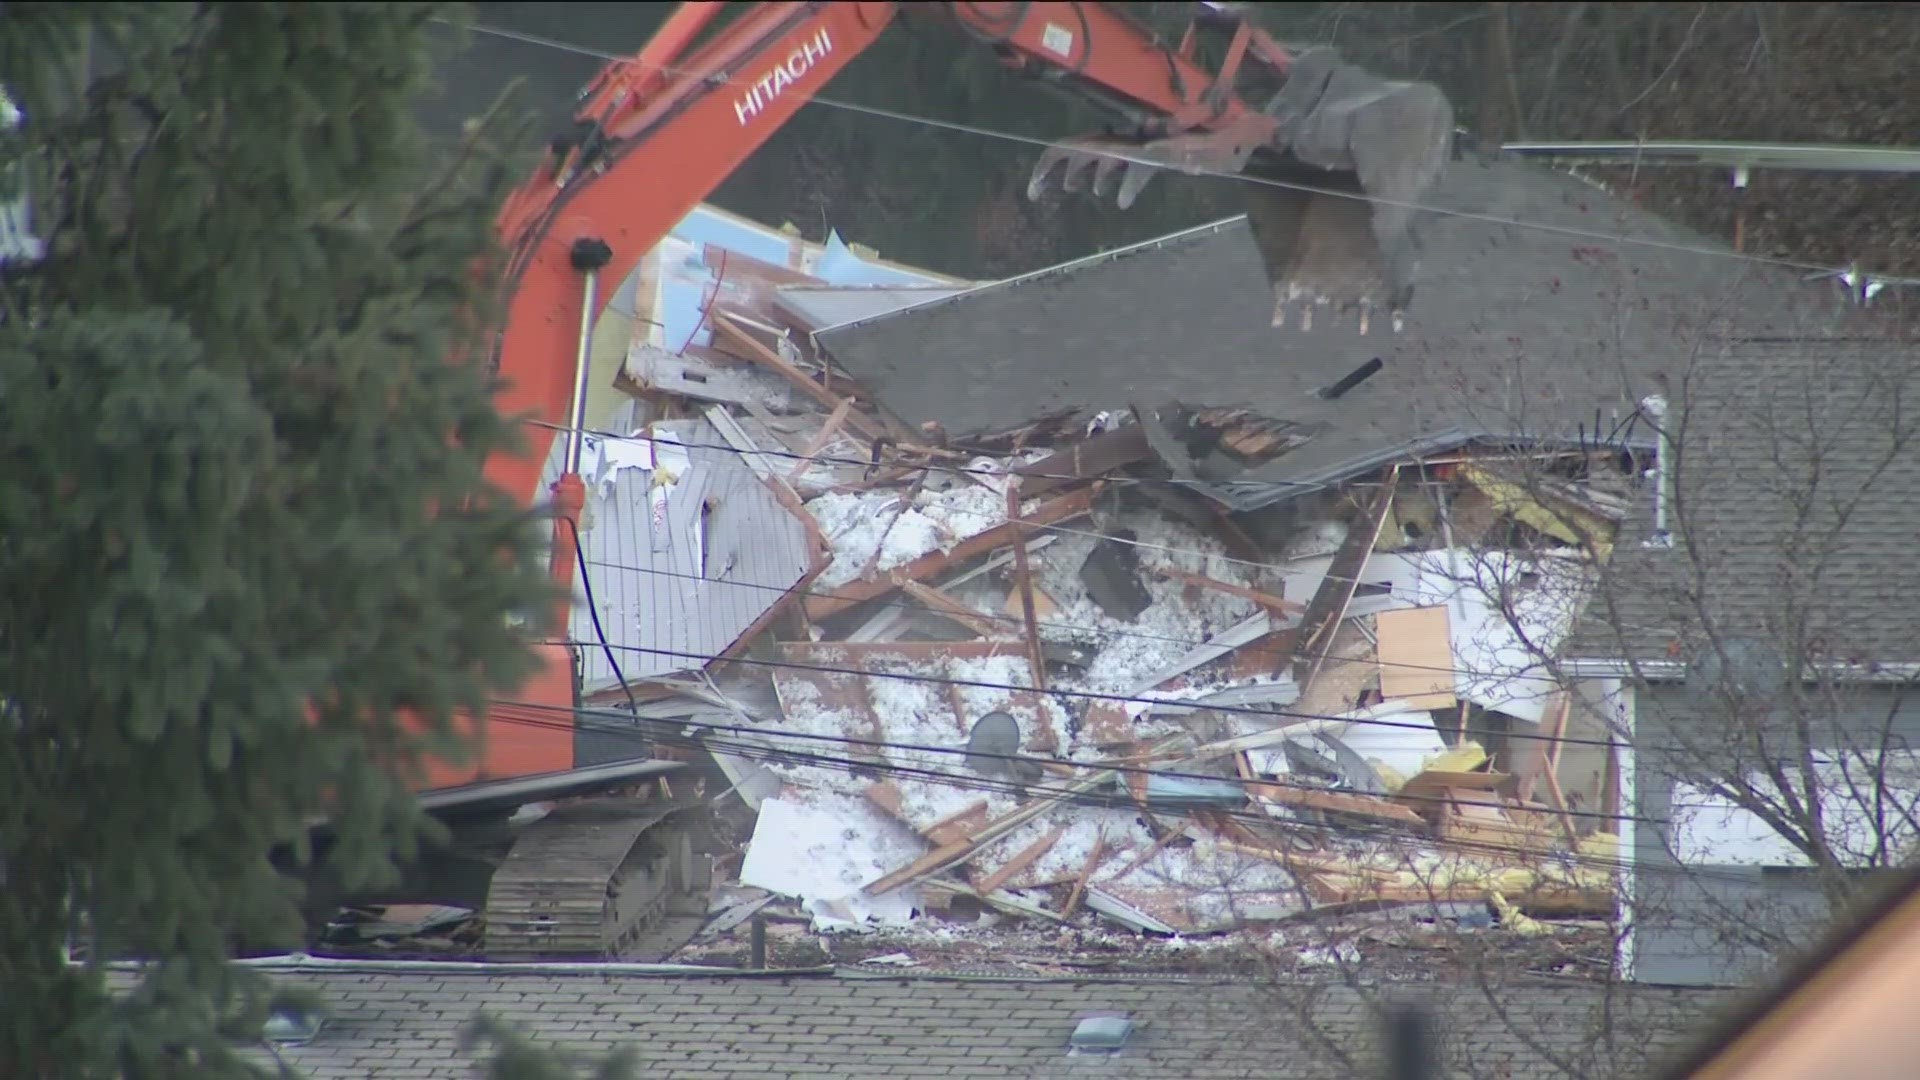 The decision made by the University of Idaho has sparked controversy, particularly among some of the victims' families, who contest the demolition.